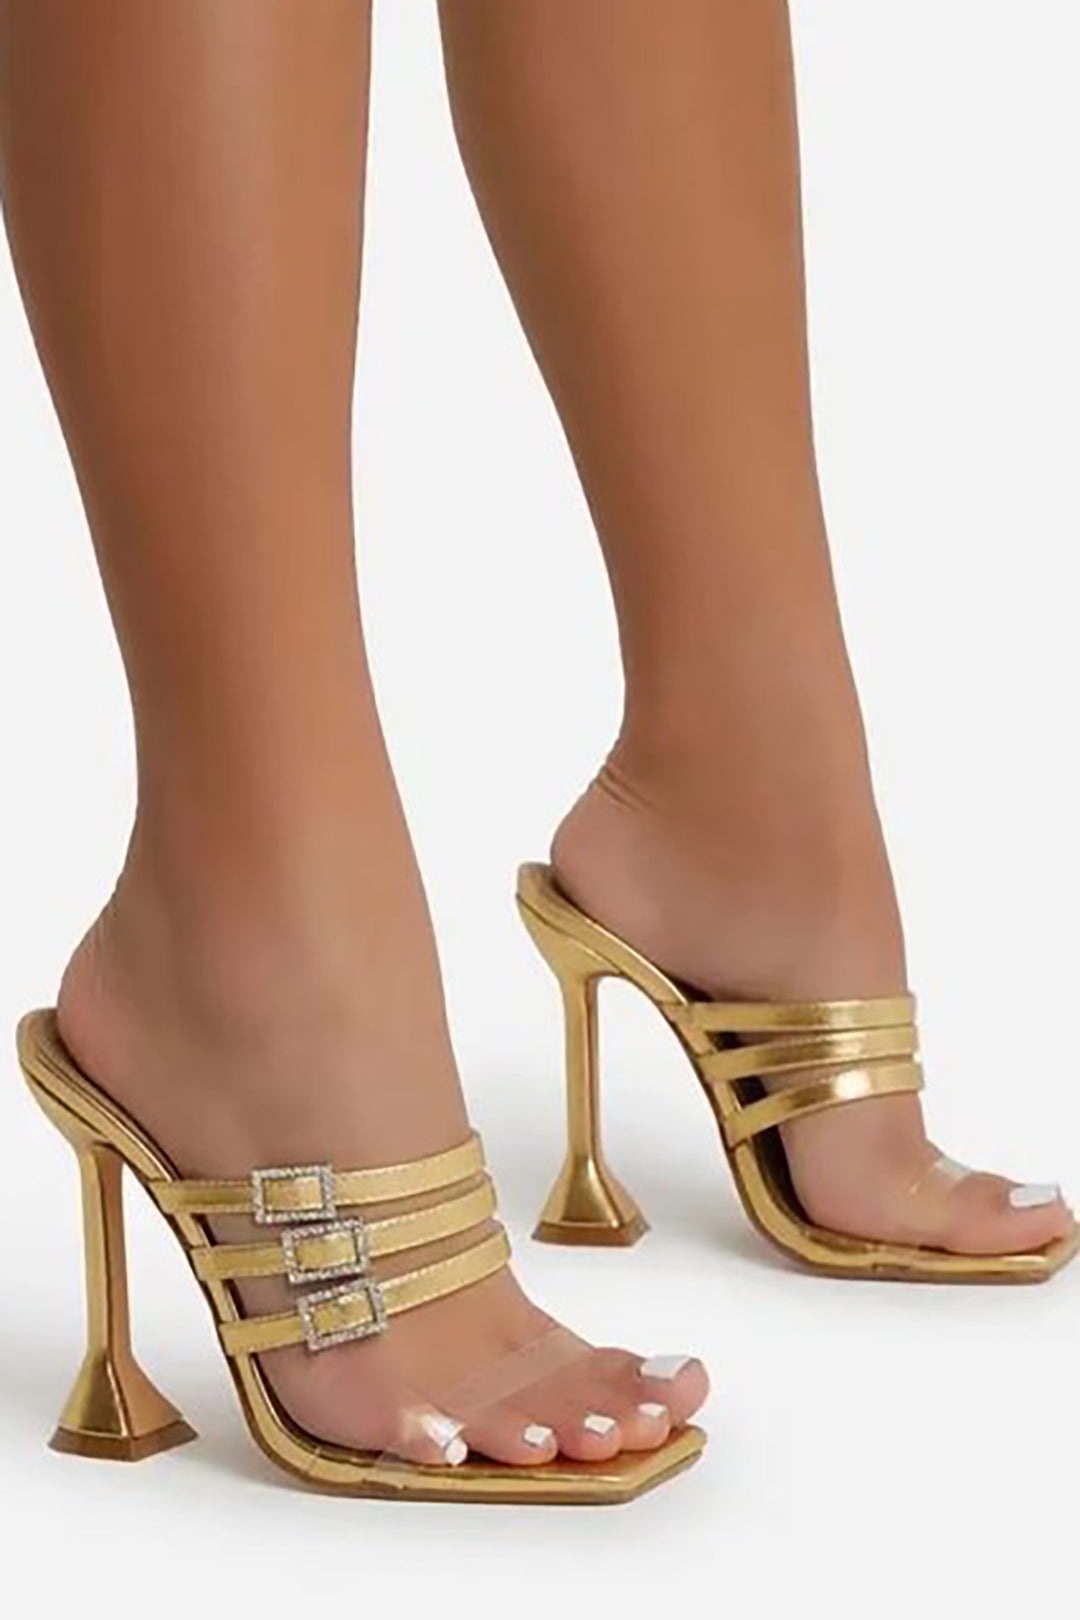 Square Toe Ankle-strapless High Heeled Sandals